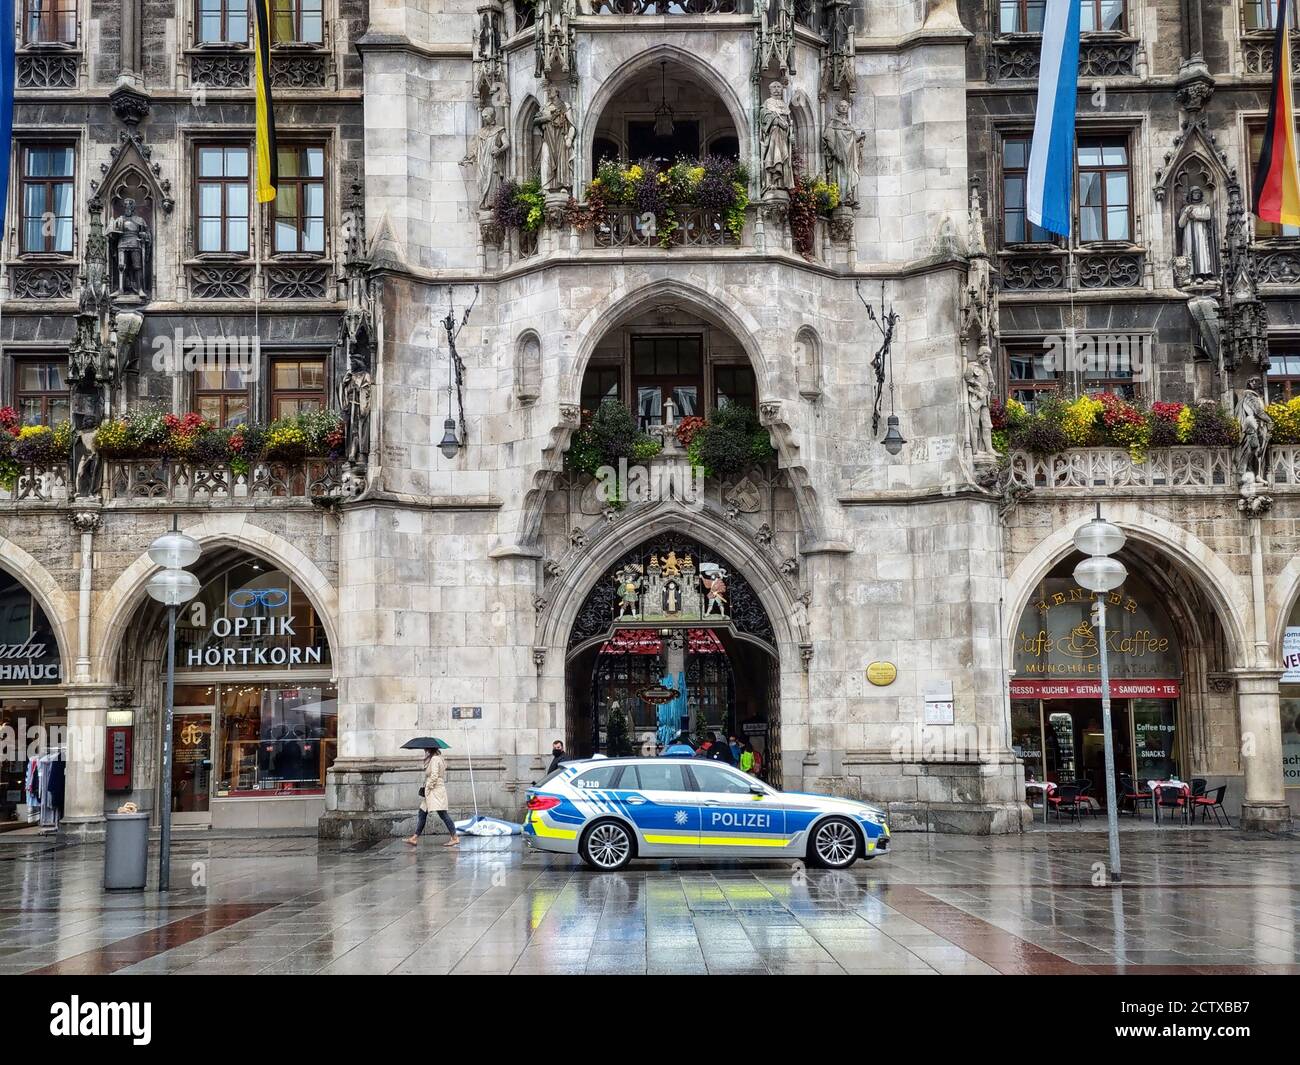 Munich, Bavaria, Germany. 25th Sep, 2020. A Munich police vehicle stationed at the Munich Rathaus (city hall) which is now a mandatory mask zone. Due to rising numbers of new Coronavirus cases, Munich is tightening measures, including a mask requirement at public plazas. Credit: Sachelle Babbar/ZUMA Wire/Alamy Live News Stock Photo